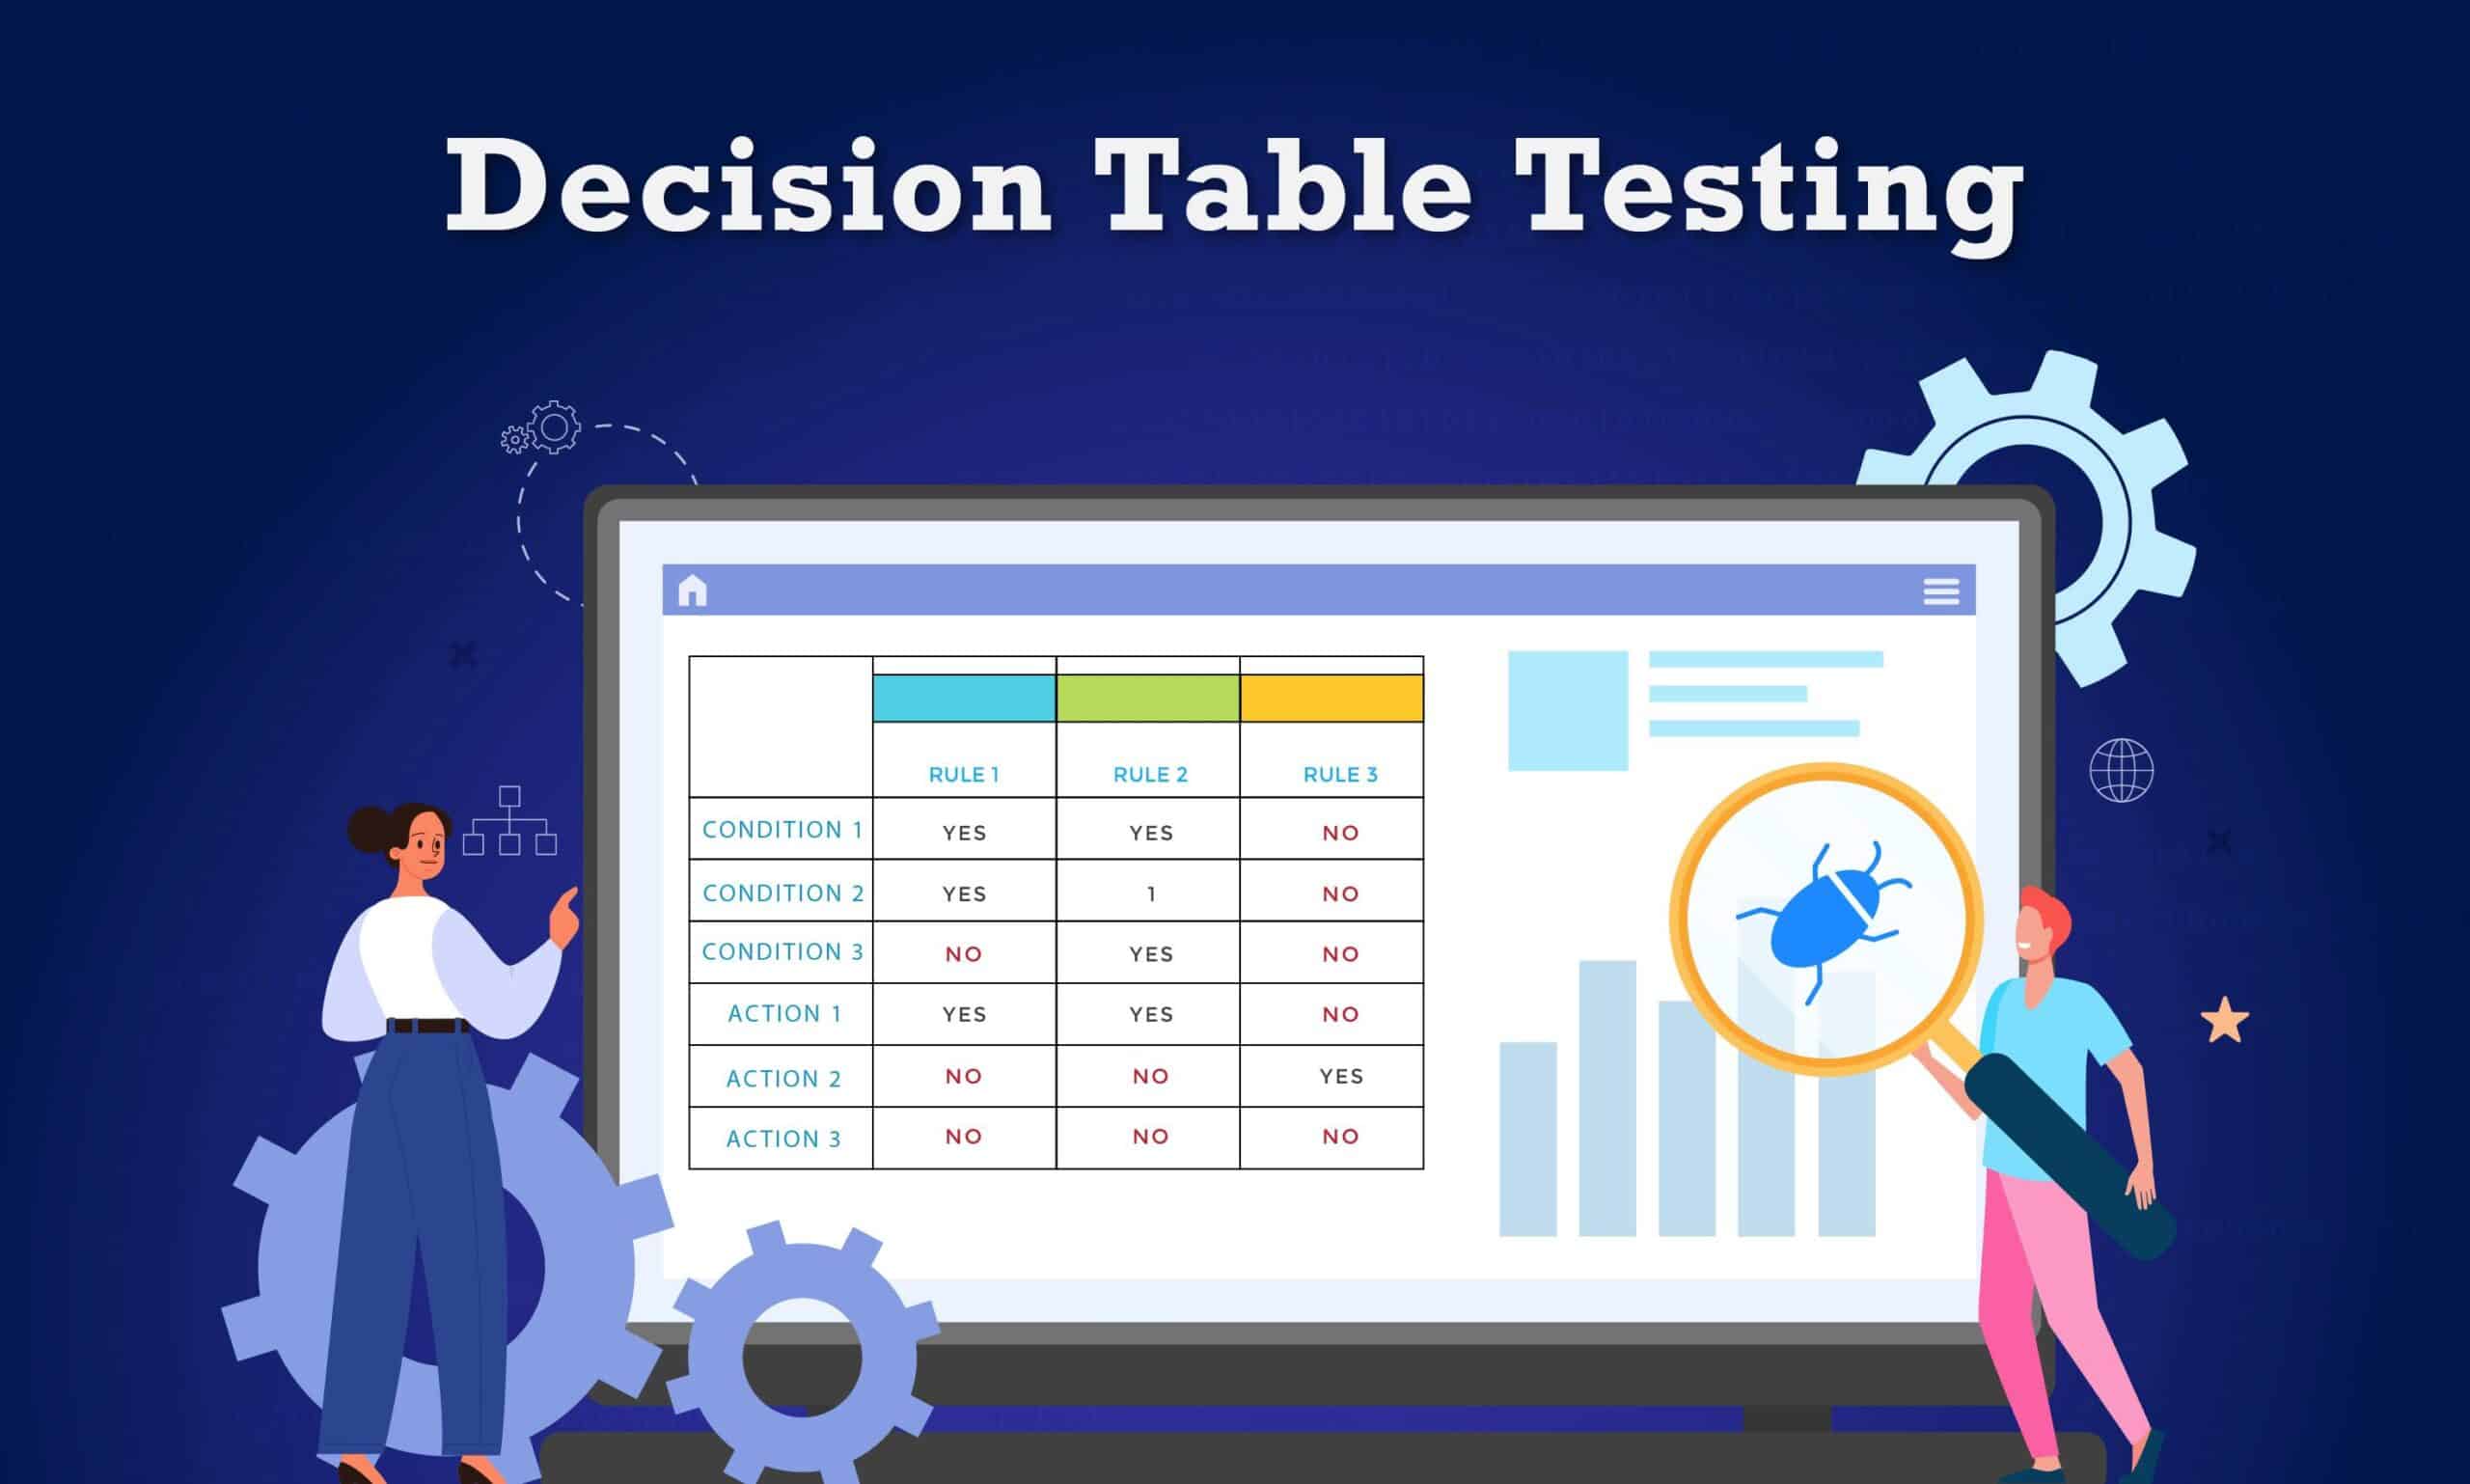 decision table testing